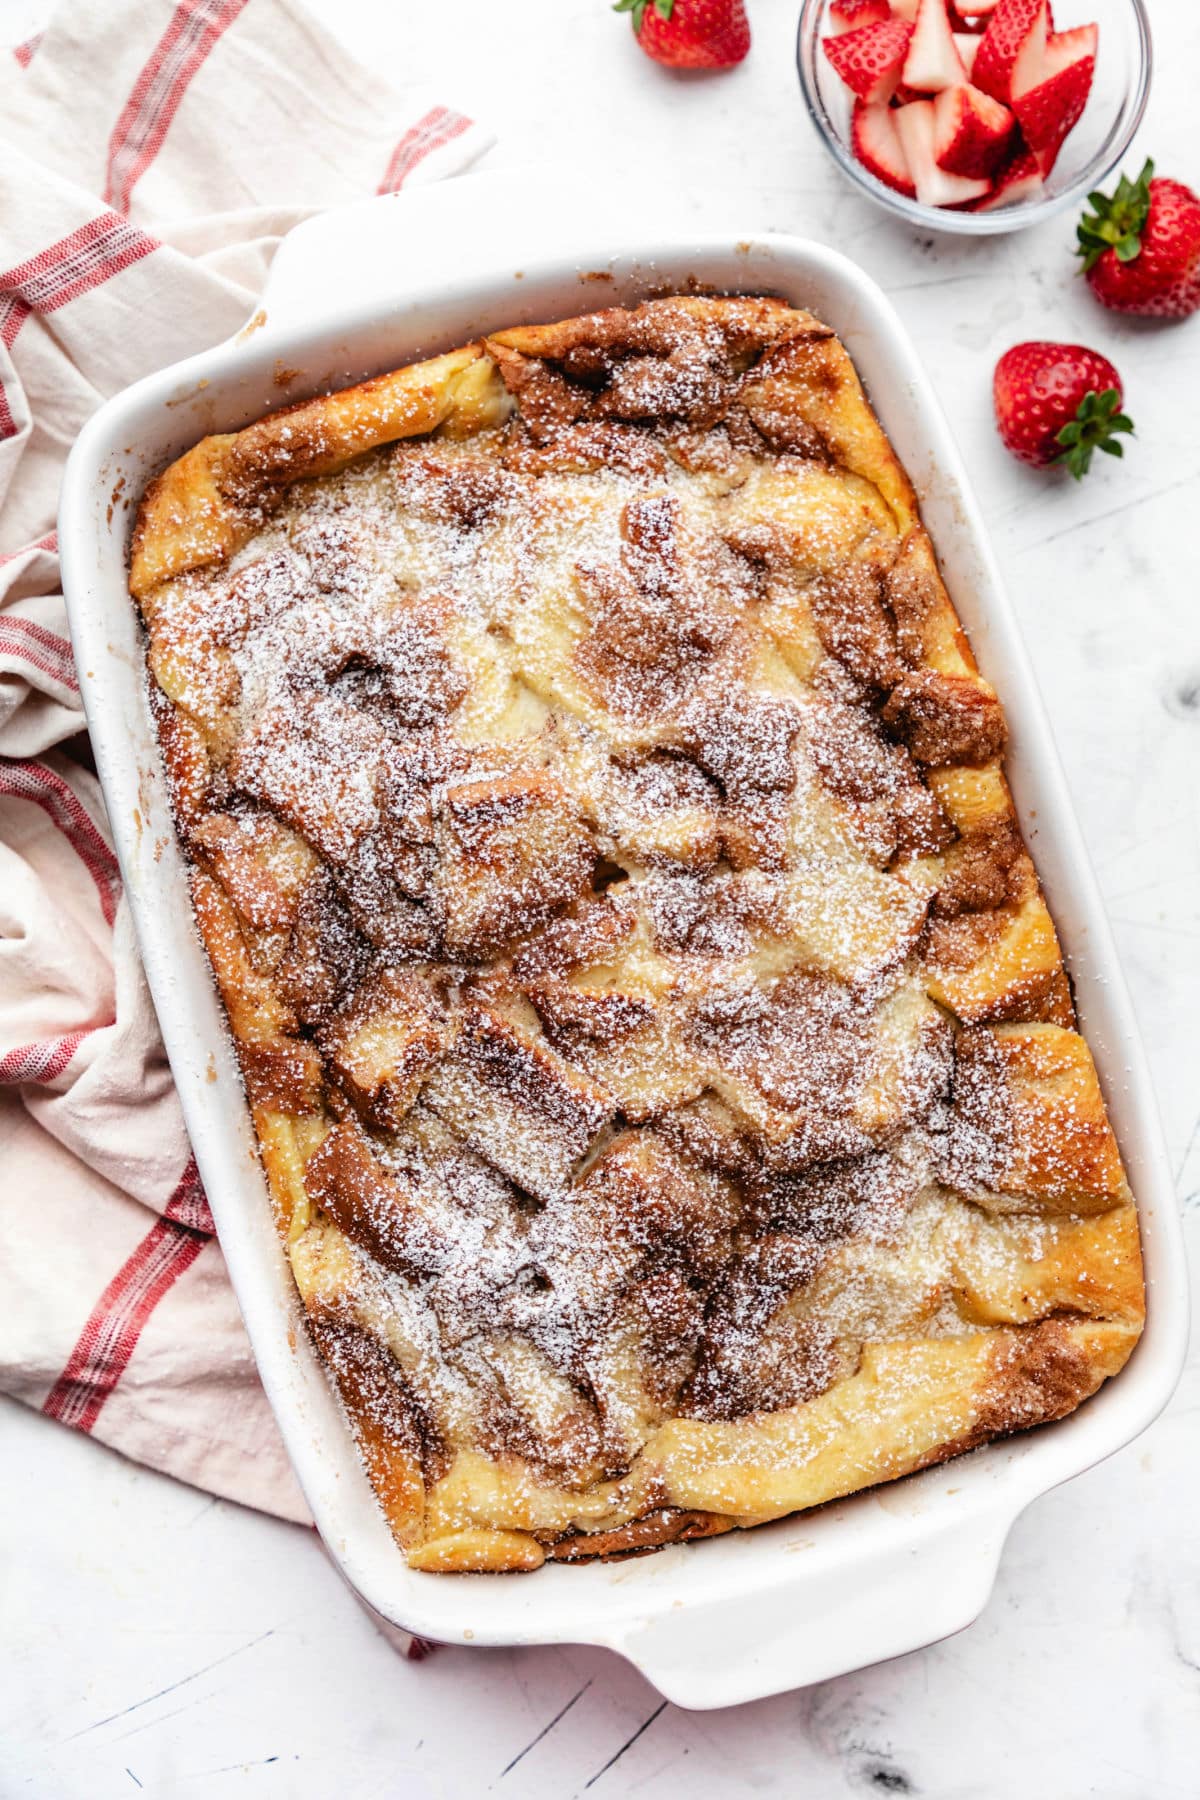 A baked French toast casserole next to fresh strawberries.